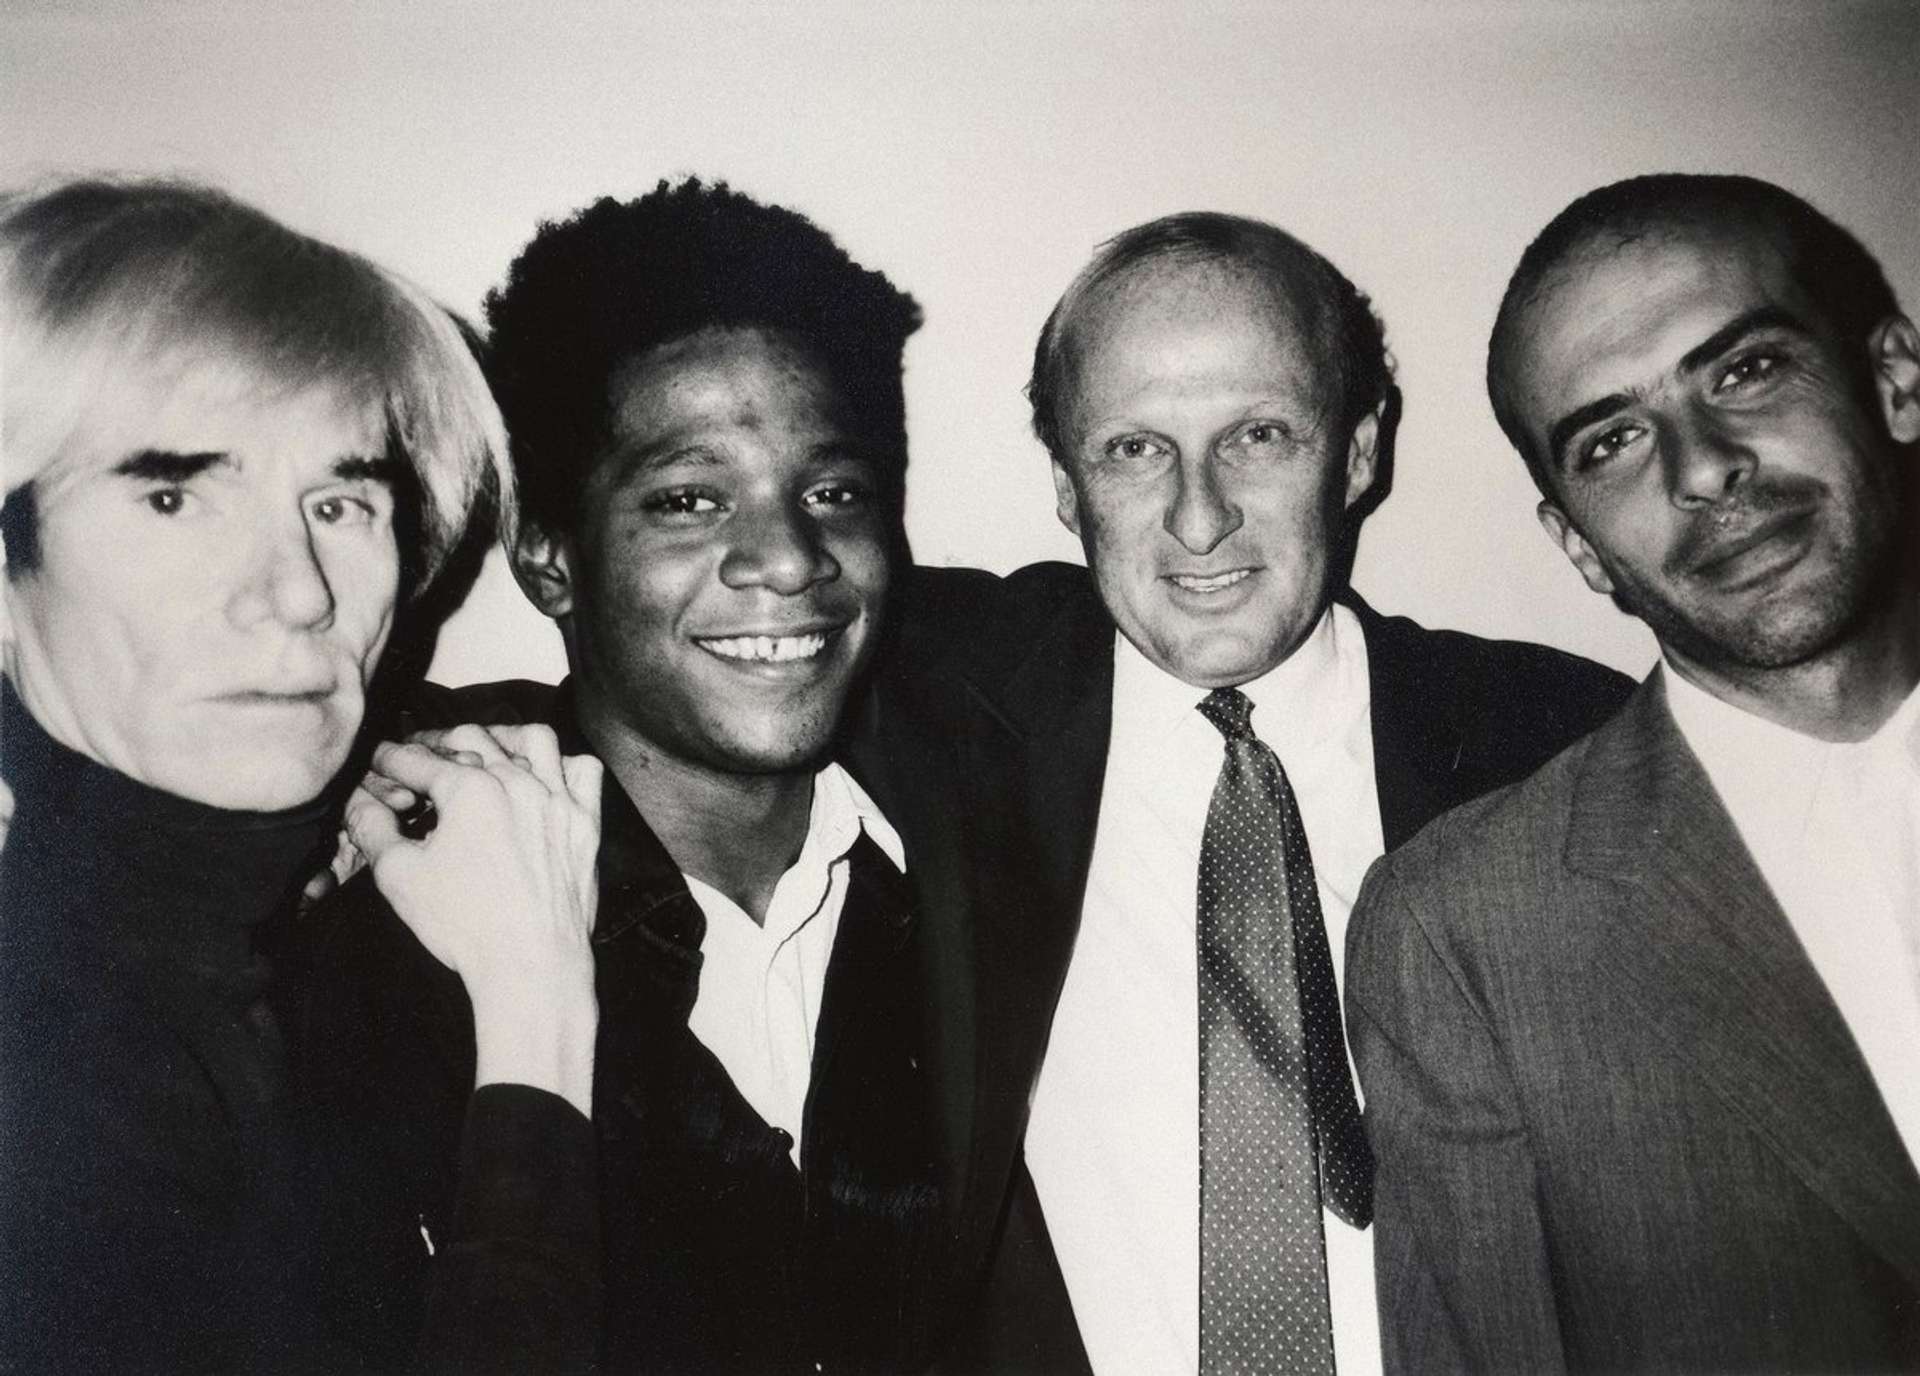 A black and white photograph of  Andy Warhol, Jean-Michel Basquiat, Bruno Bischofberger and Fransesco Clemente, New York, 1984.